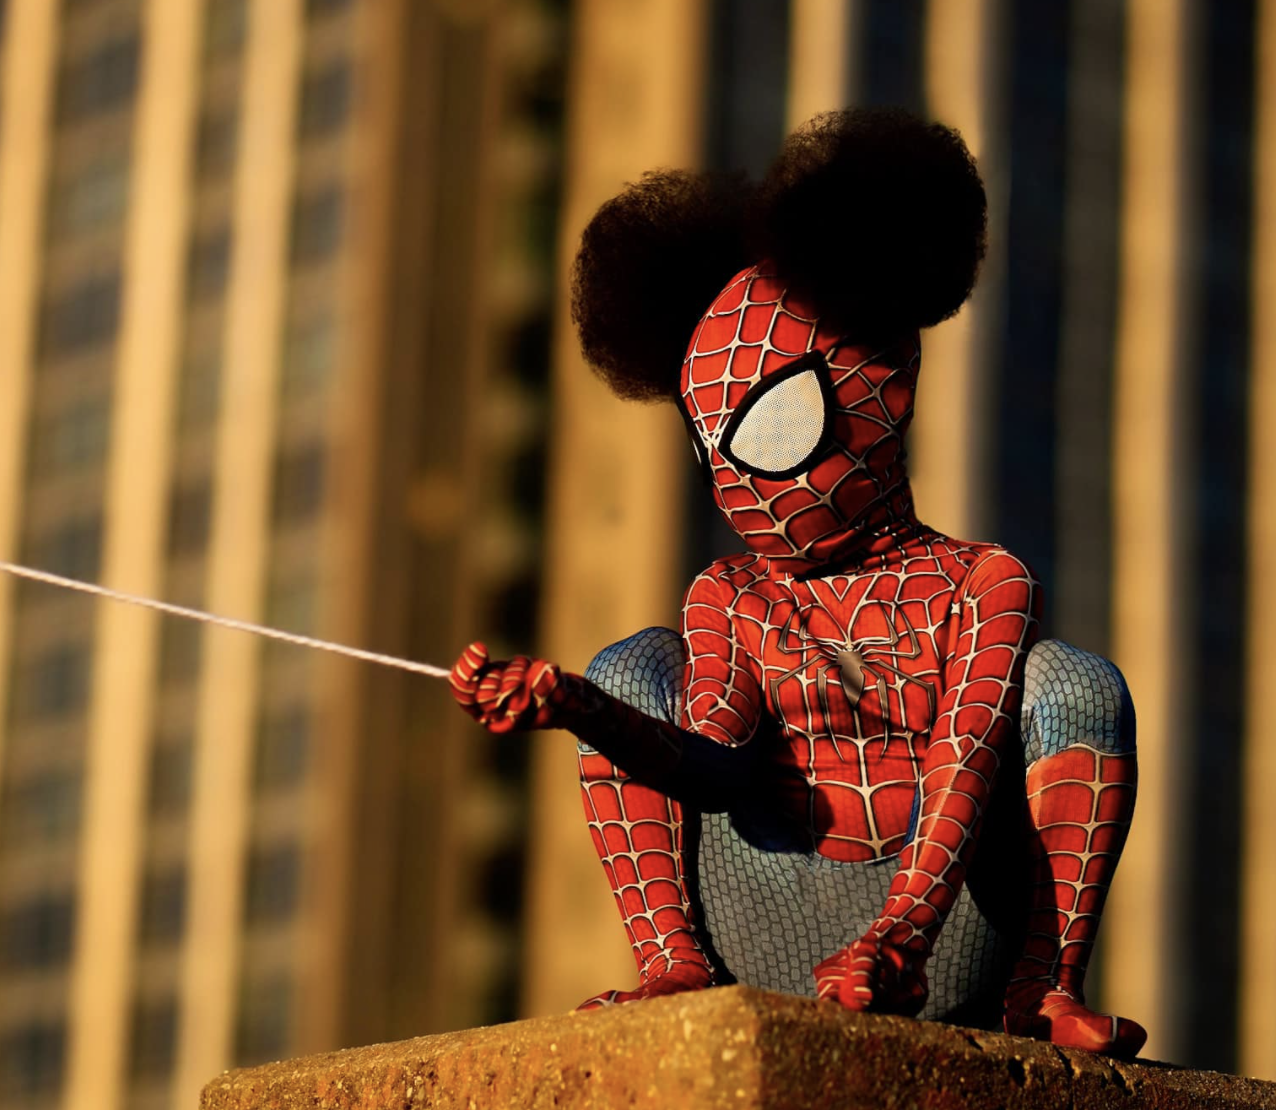 Mom Who Took Photos Of Daughter In Spider-Man Costume Says, ‘You Can Be Whatever You Want To Be’